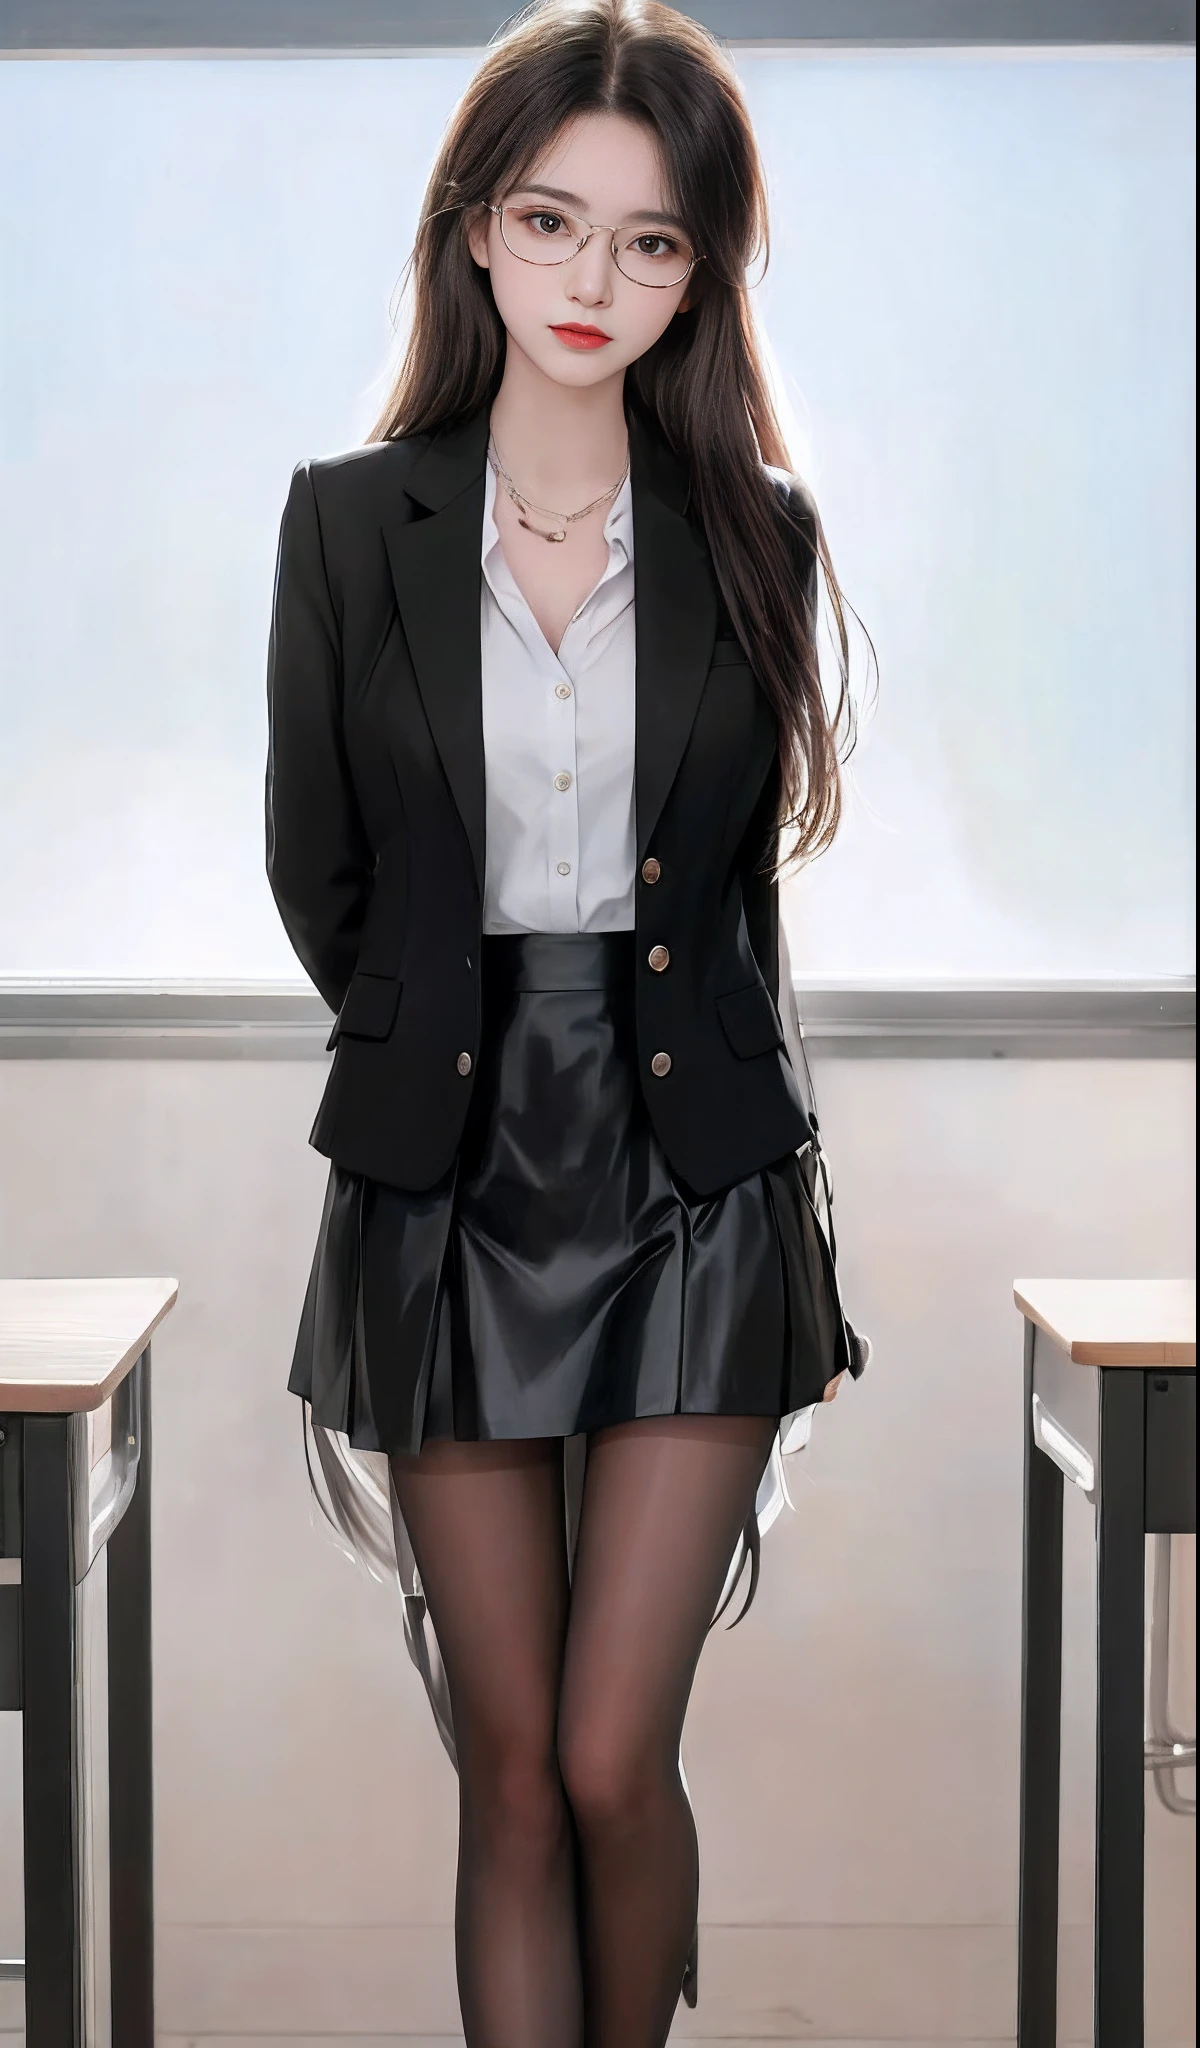 Close-up of a woman in a skirt and jacket posing for a photo, wearing jacket and skirt, JK school uniform, office clothes, Magical school student uniform, wearing a black noble suit, wearing a strict business suit, short skirt and a long jacket, girl in a suit, black leather slim clothes, business outfit, magic school uniform, , Girl in suit,wears glasses